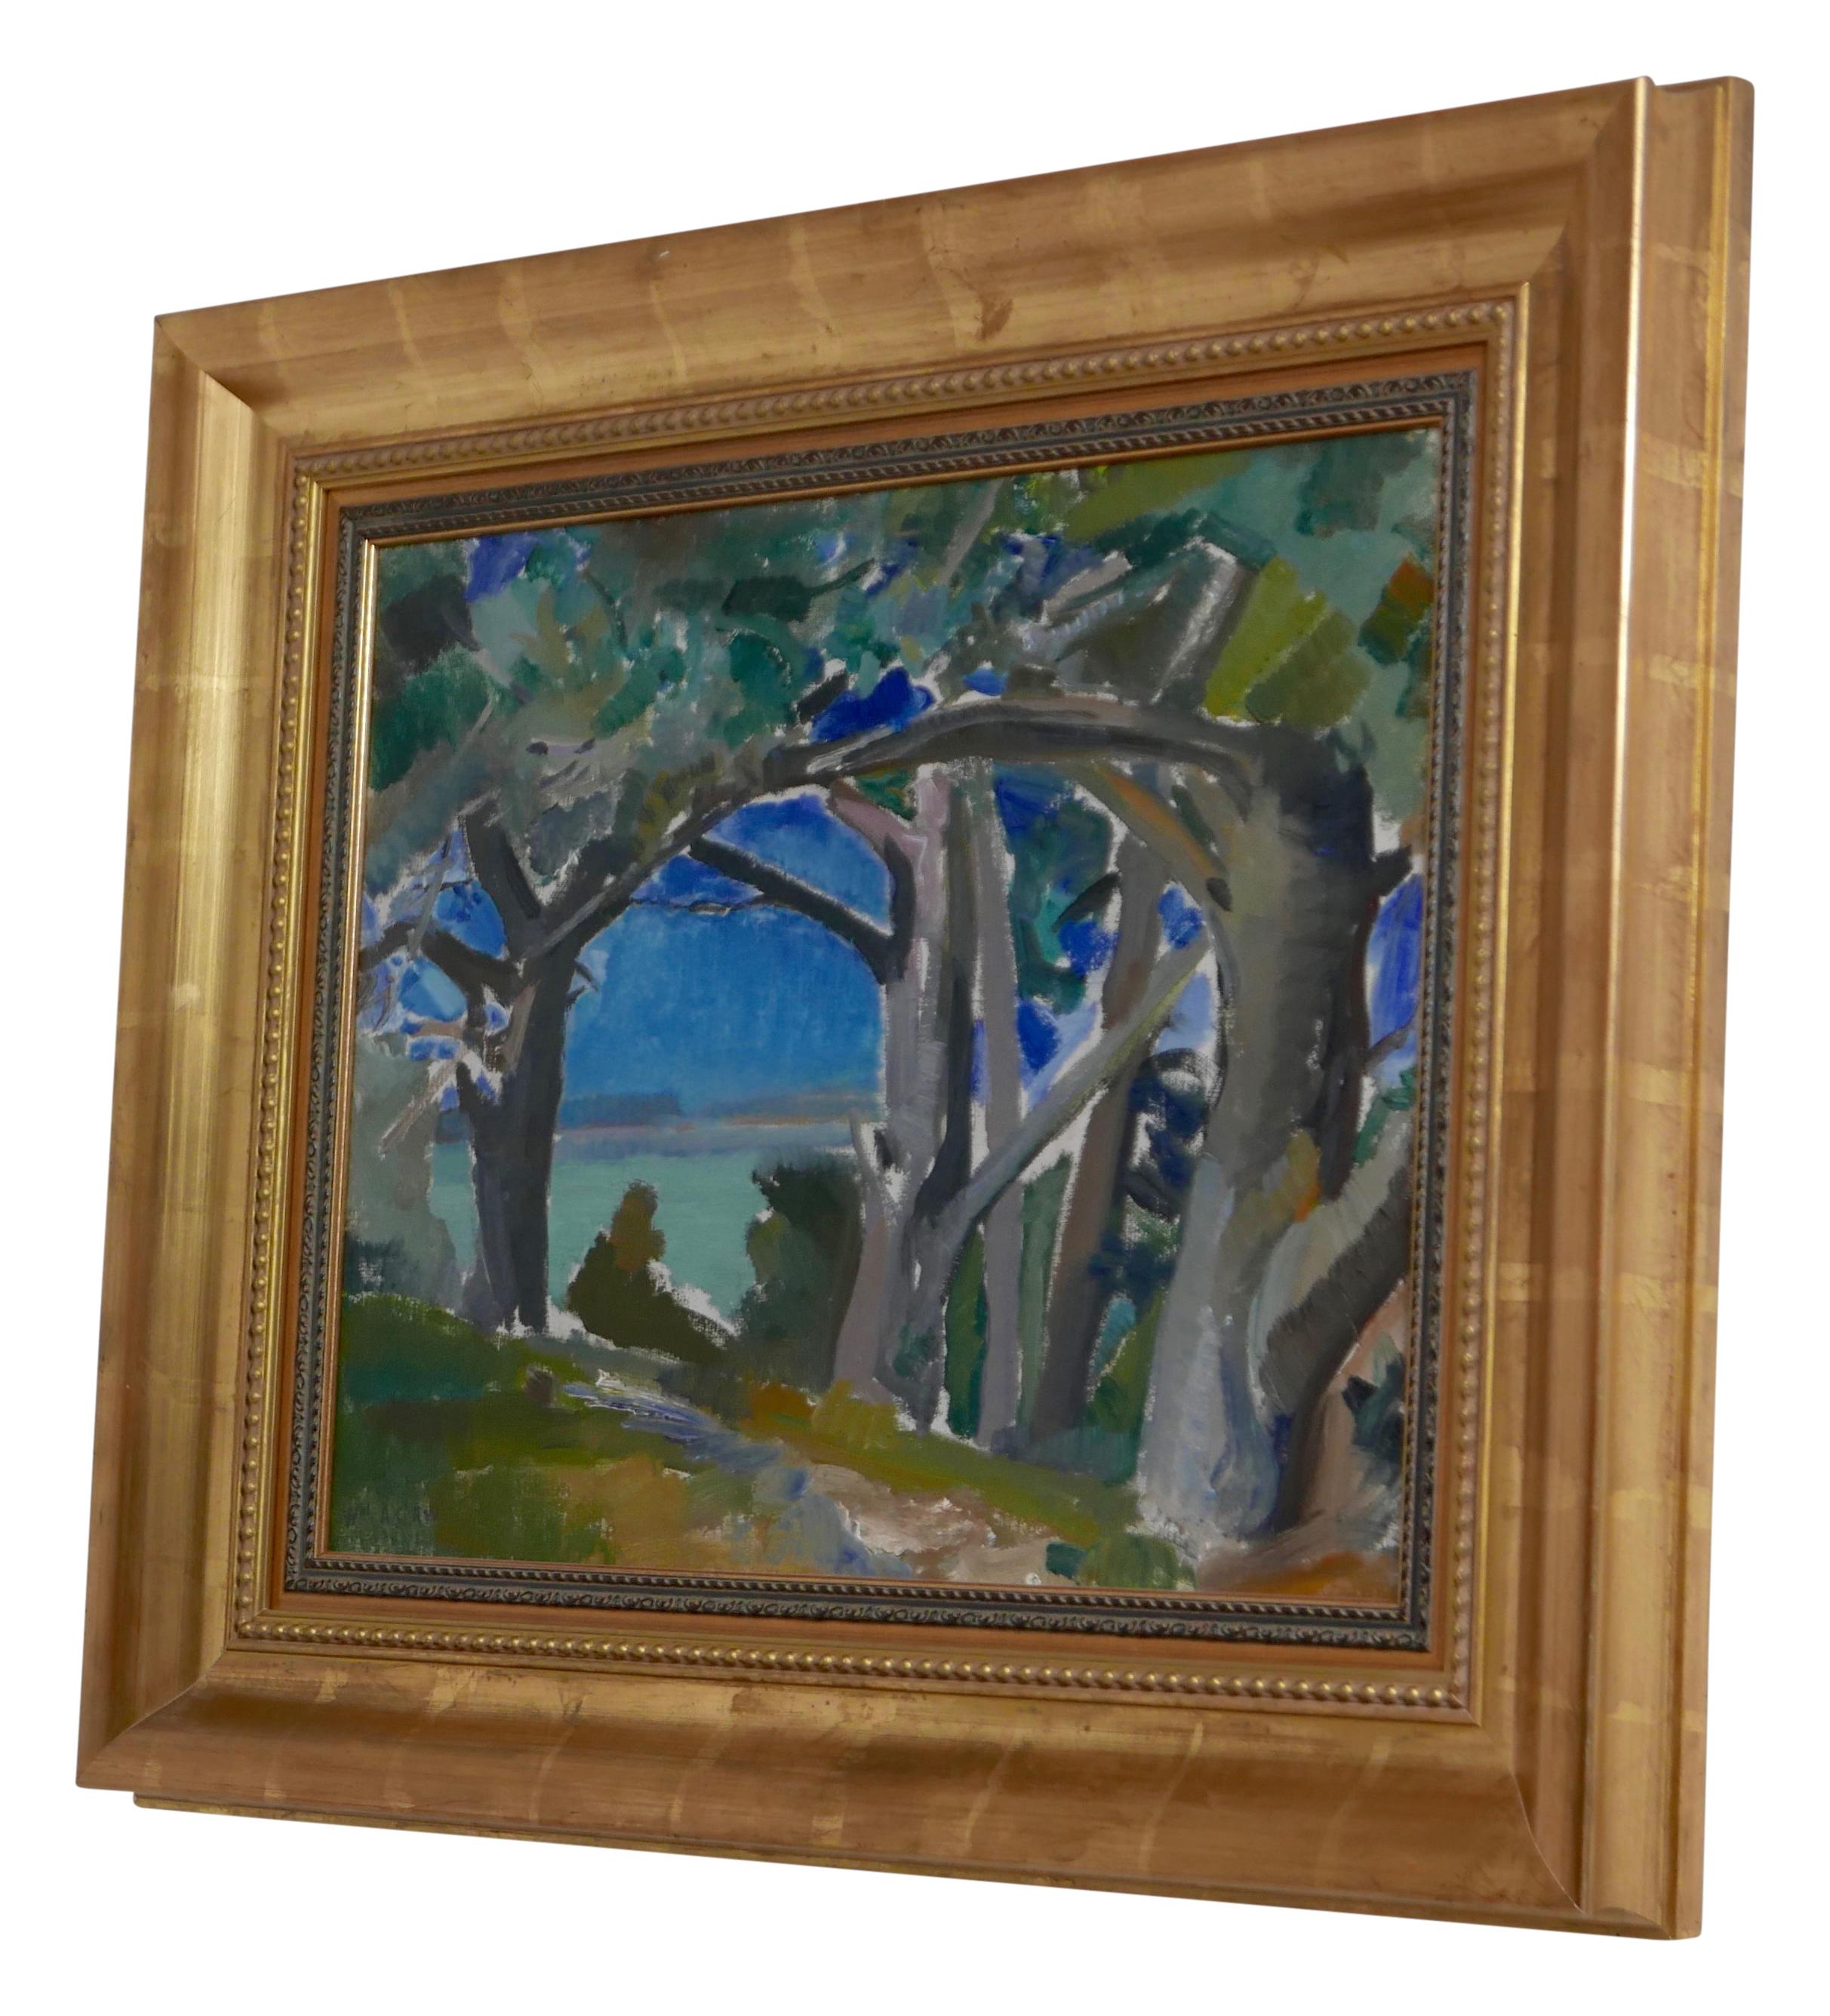 Hand-Painted California Impressionist Landscape Painting by William Alexander Gaw